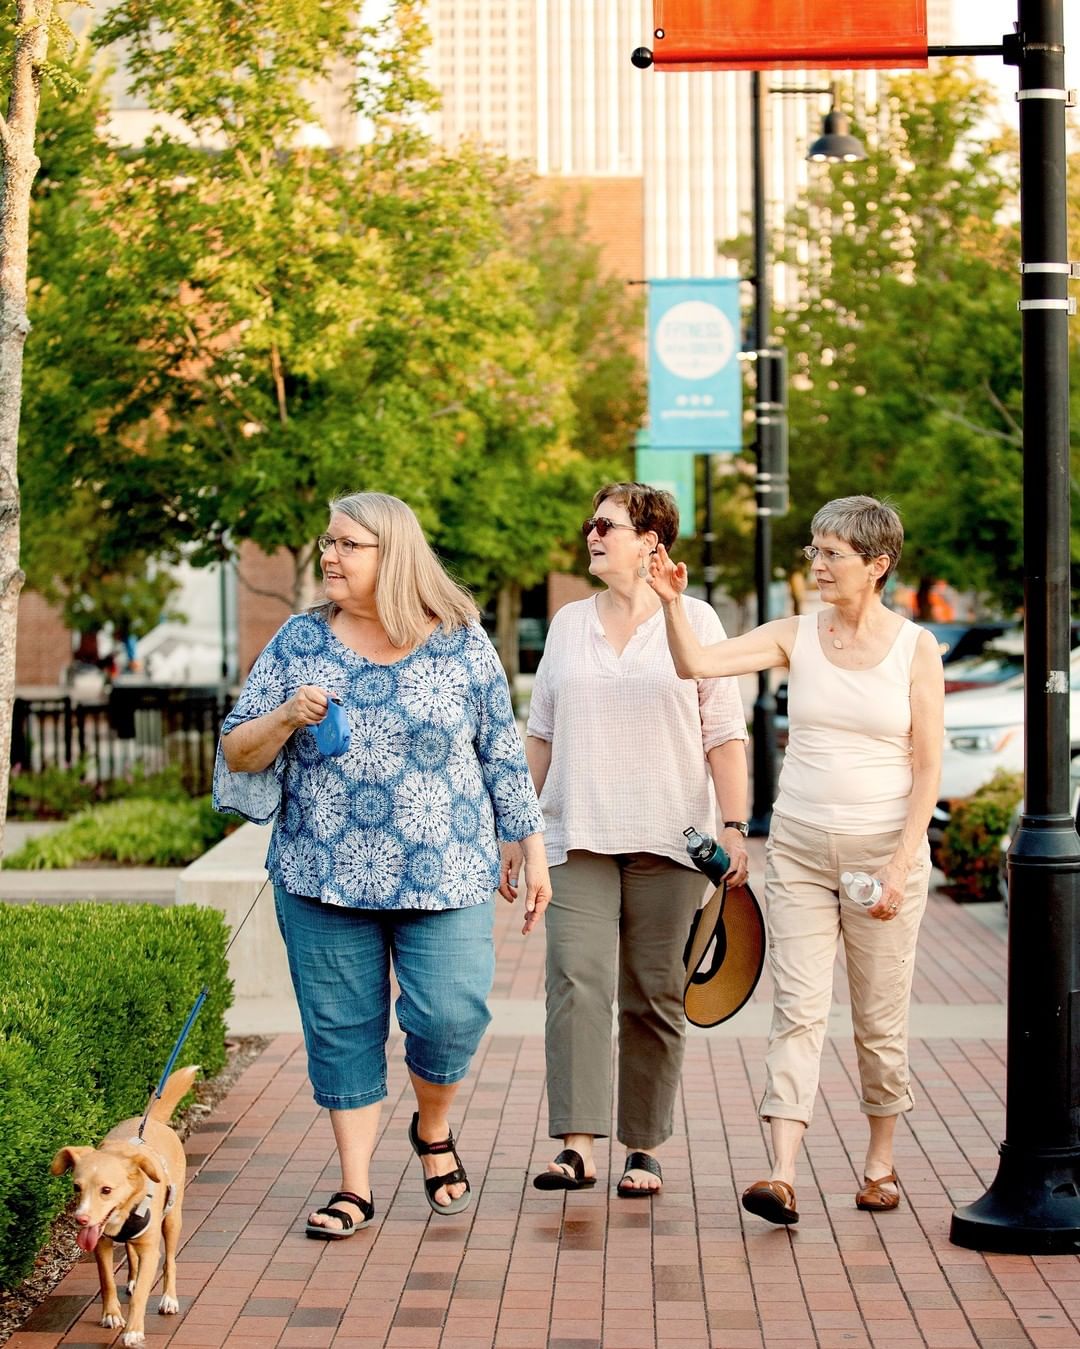 Three Older Women Walking in Downtown Tulsa. Photo by Instagram user @heartwoodcommons_tulsa